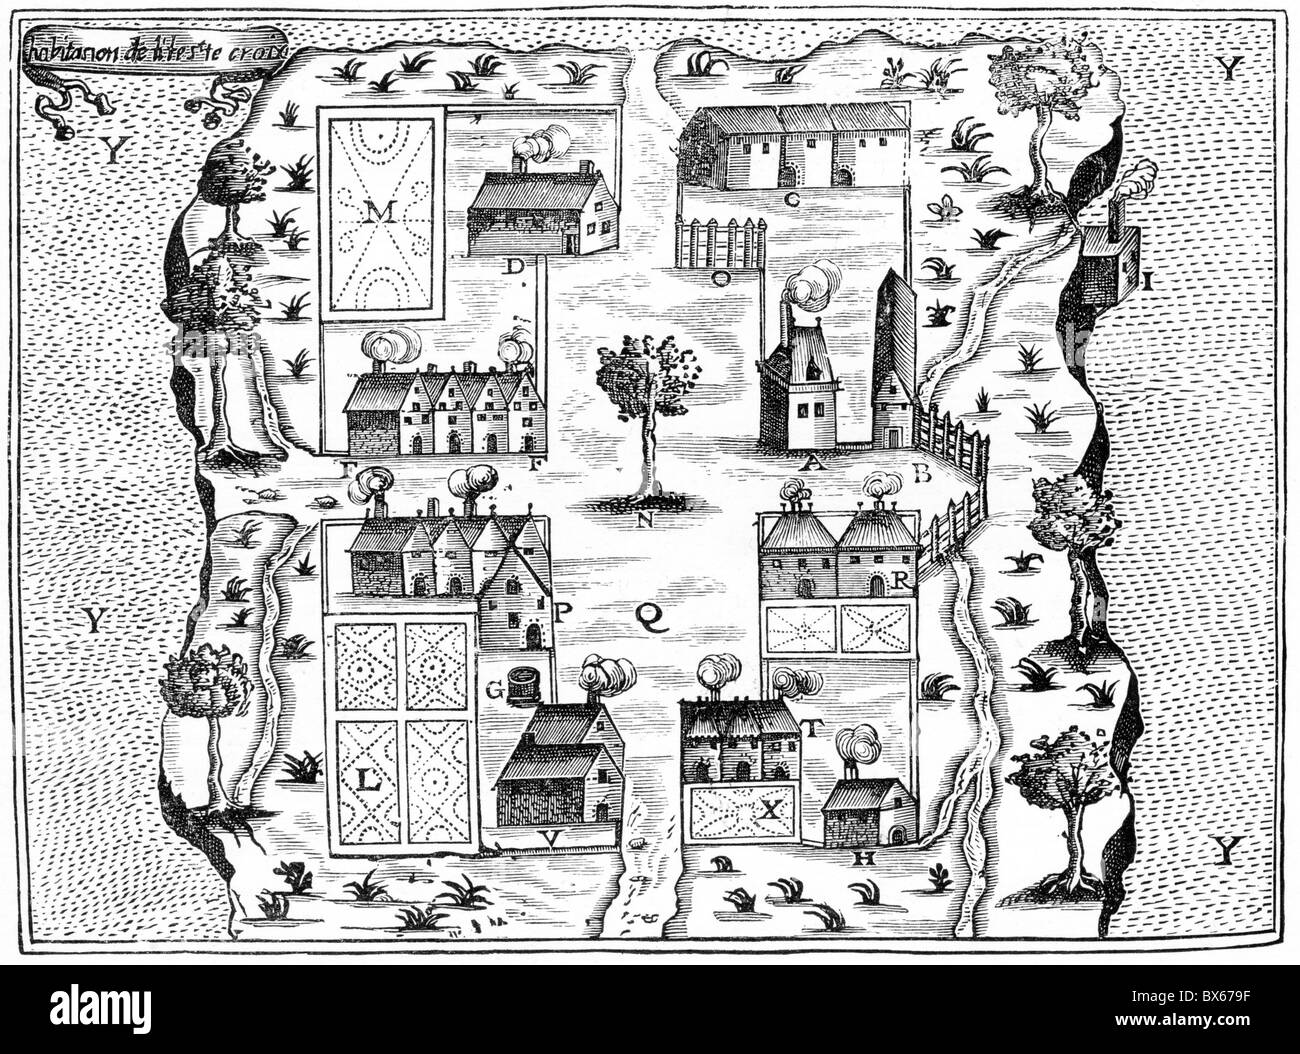 Ile St Croix, the earliest French settlement in Arcadia, 1604; Black and White Illustration; Stock Photo